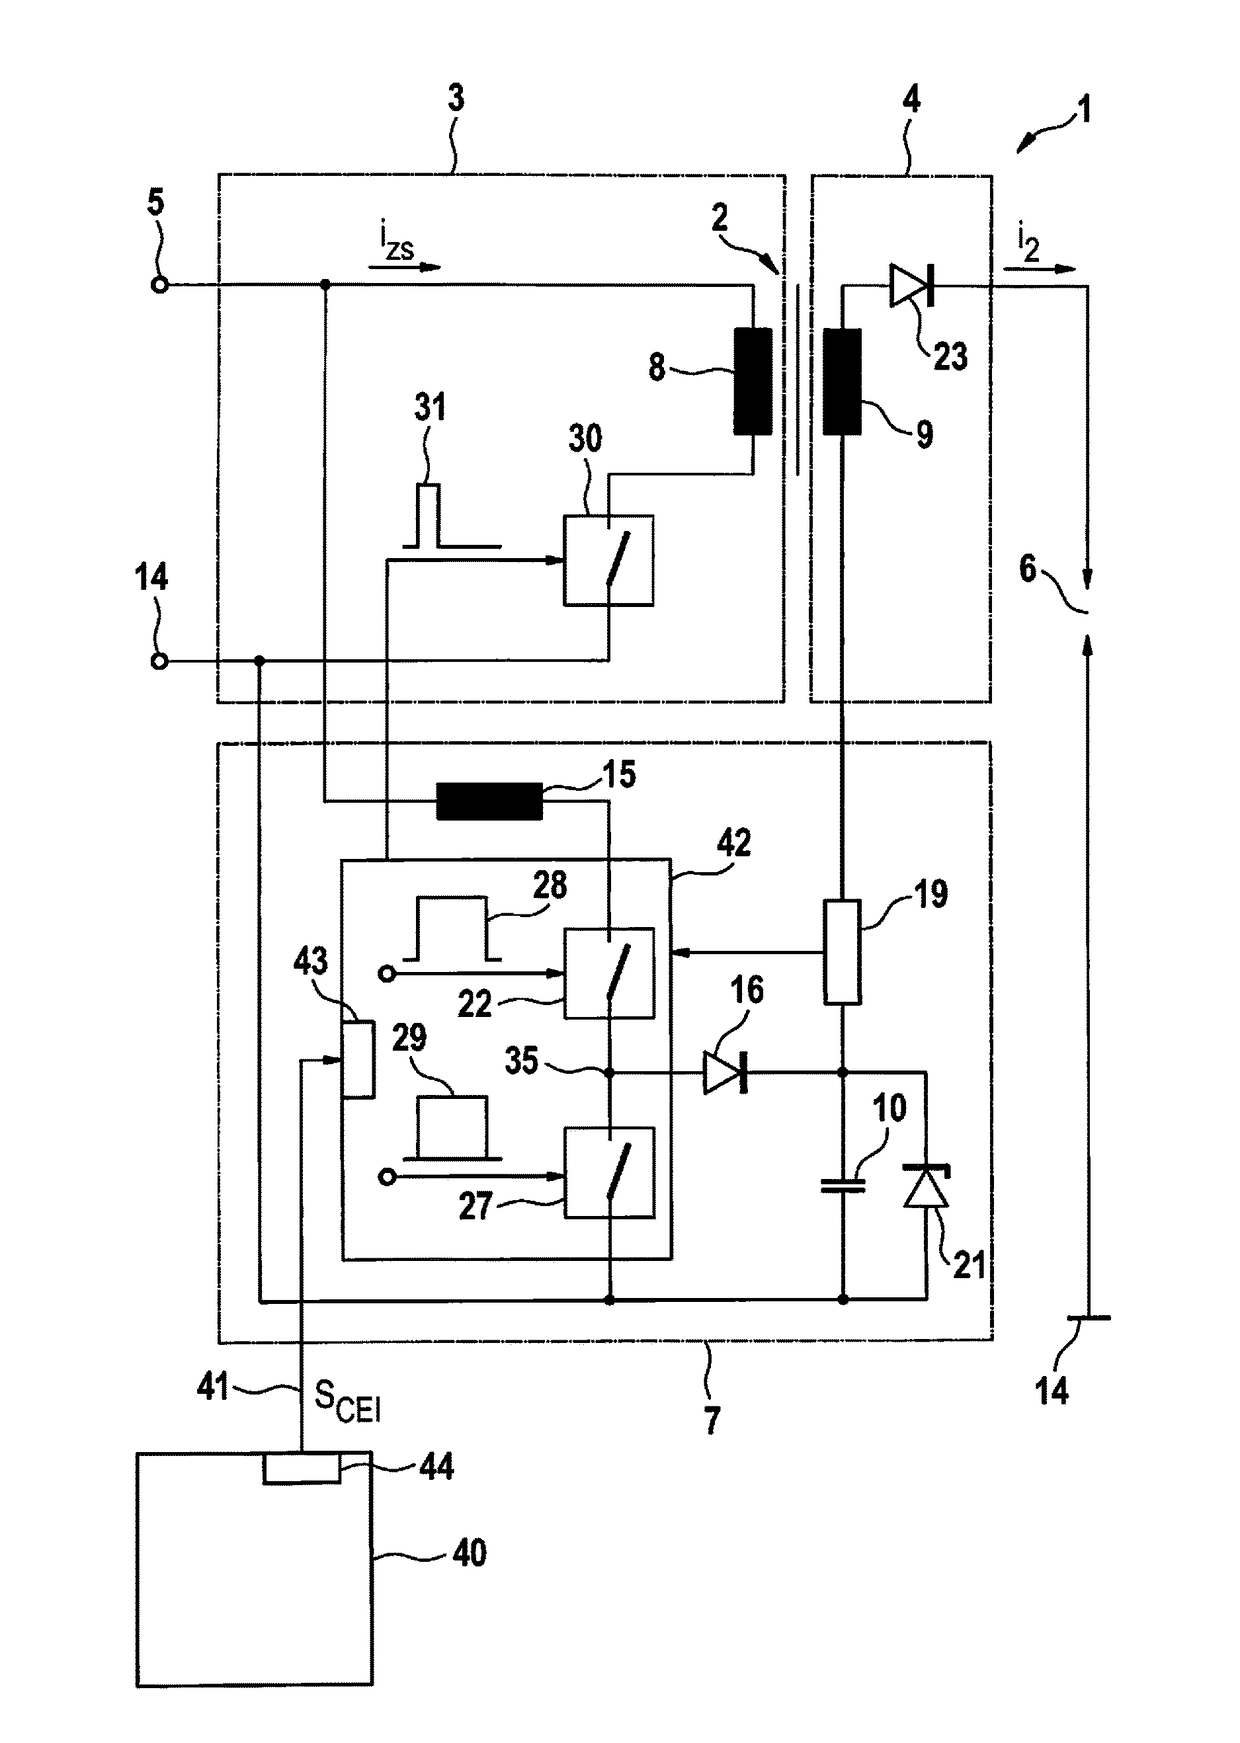 Ignition system and method for controlling an ignition system for a spark-ignited internal combustion engine